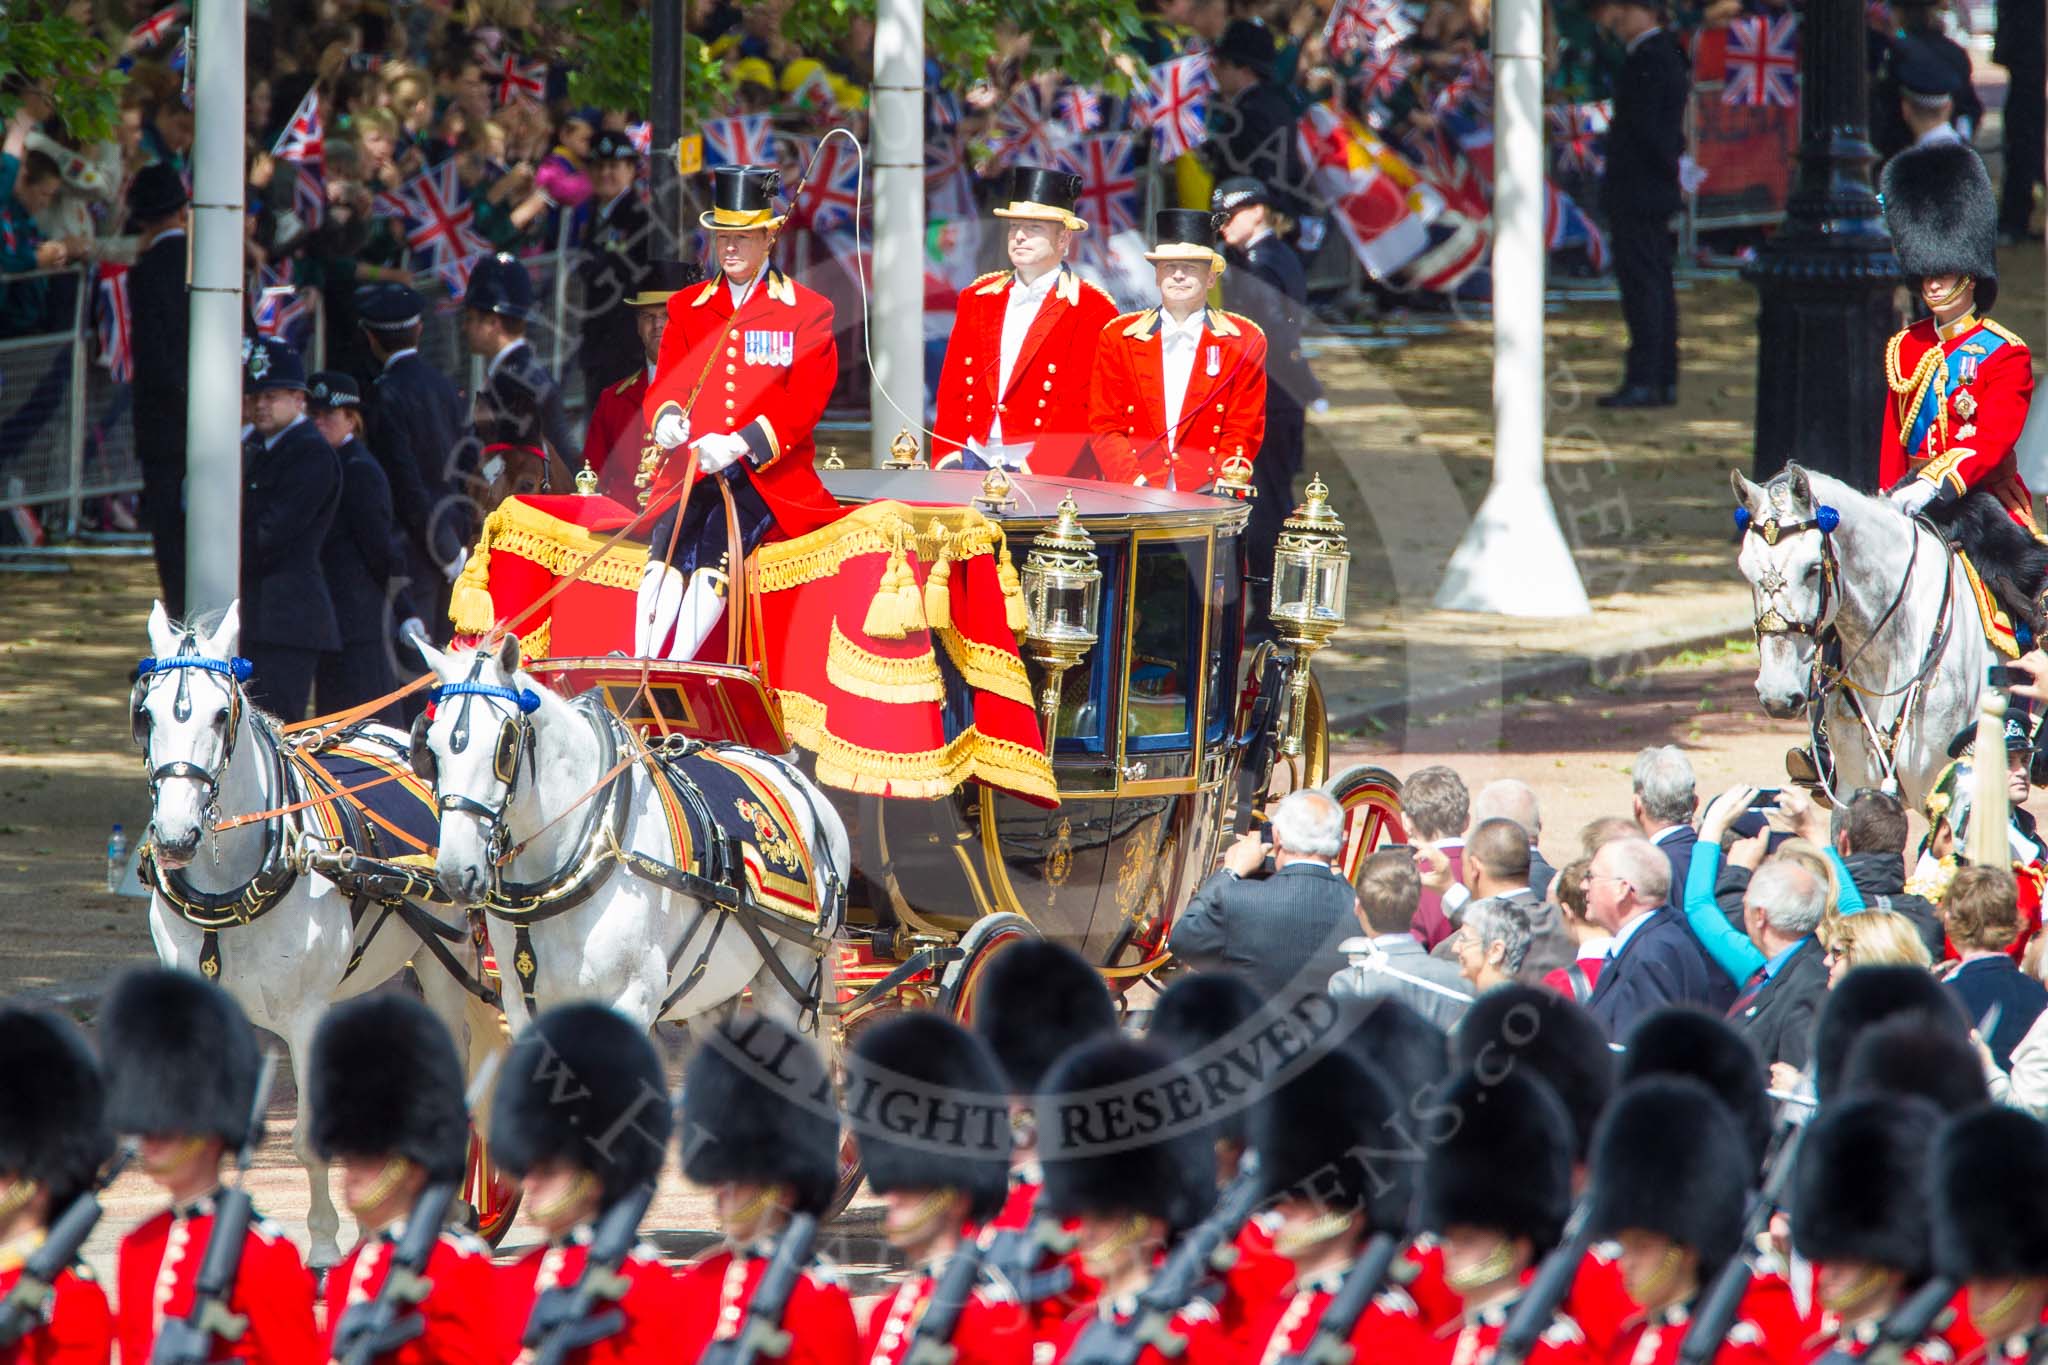 Trooping the Colour 2013: The Glass Coach carrying HM The Queen arrives at Horse Guards Parade, drawn by two Windsor Grey horses. On the very right HRH The Duke of Cambridge. Image #250, 15 June 2013 10:58 Horse Guards Parade, London, UK